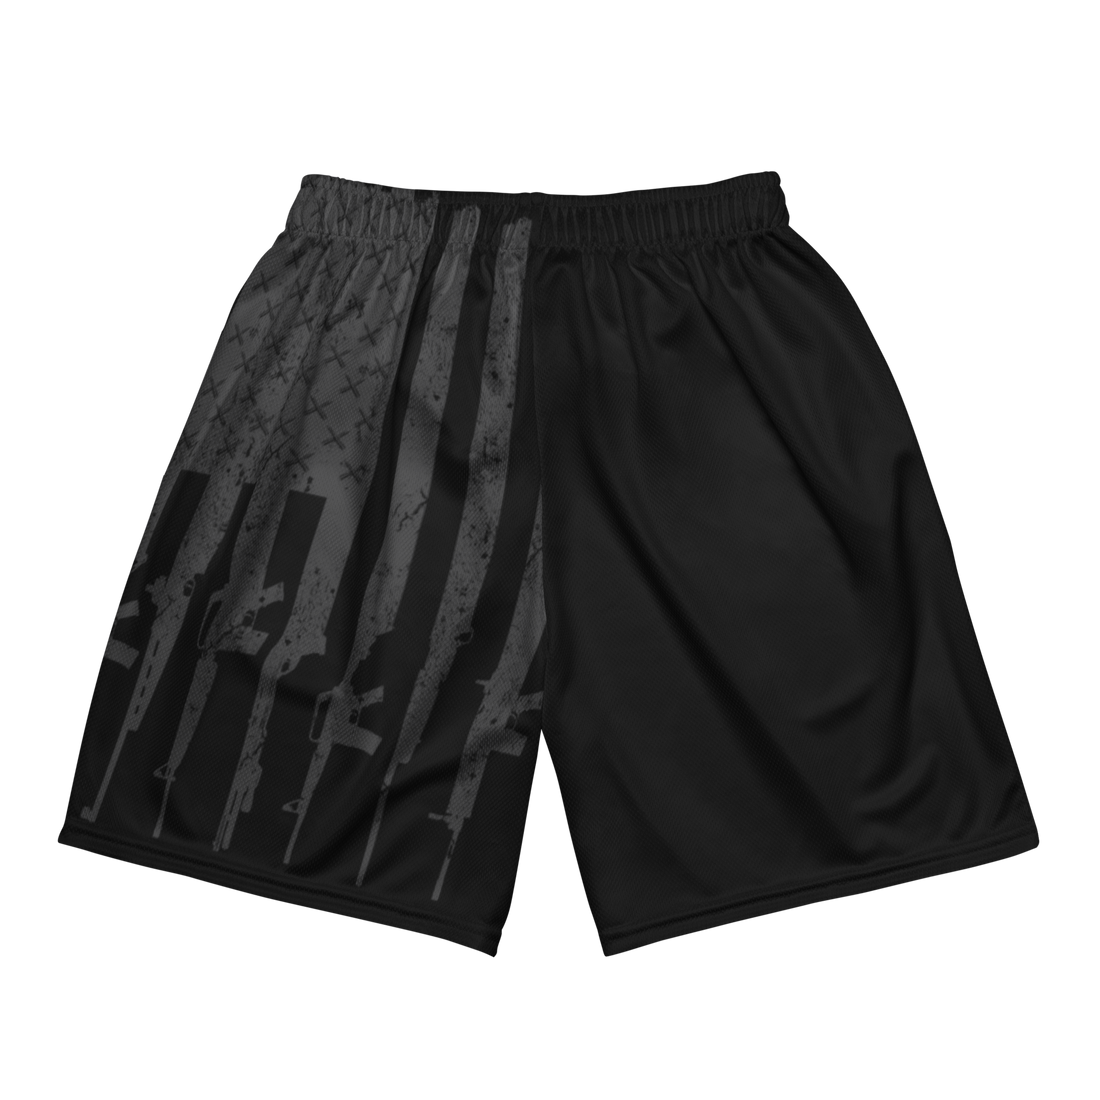  Men's Tactical Pattern Mesh Gym Shorts in black with gunmetal grey rifles and pockets, River to Ridge Brand